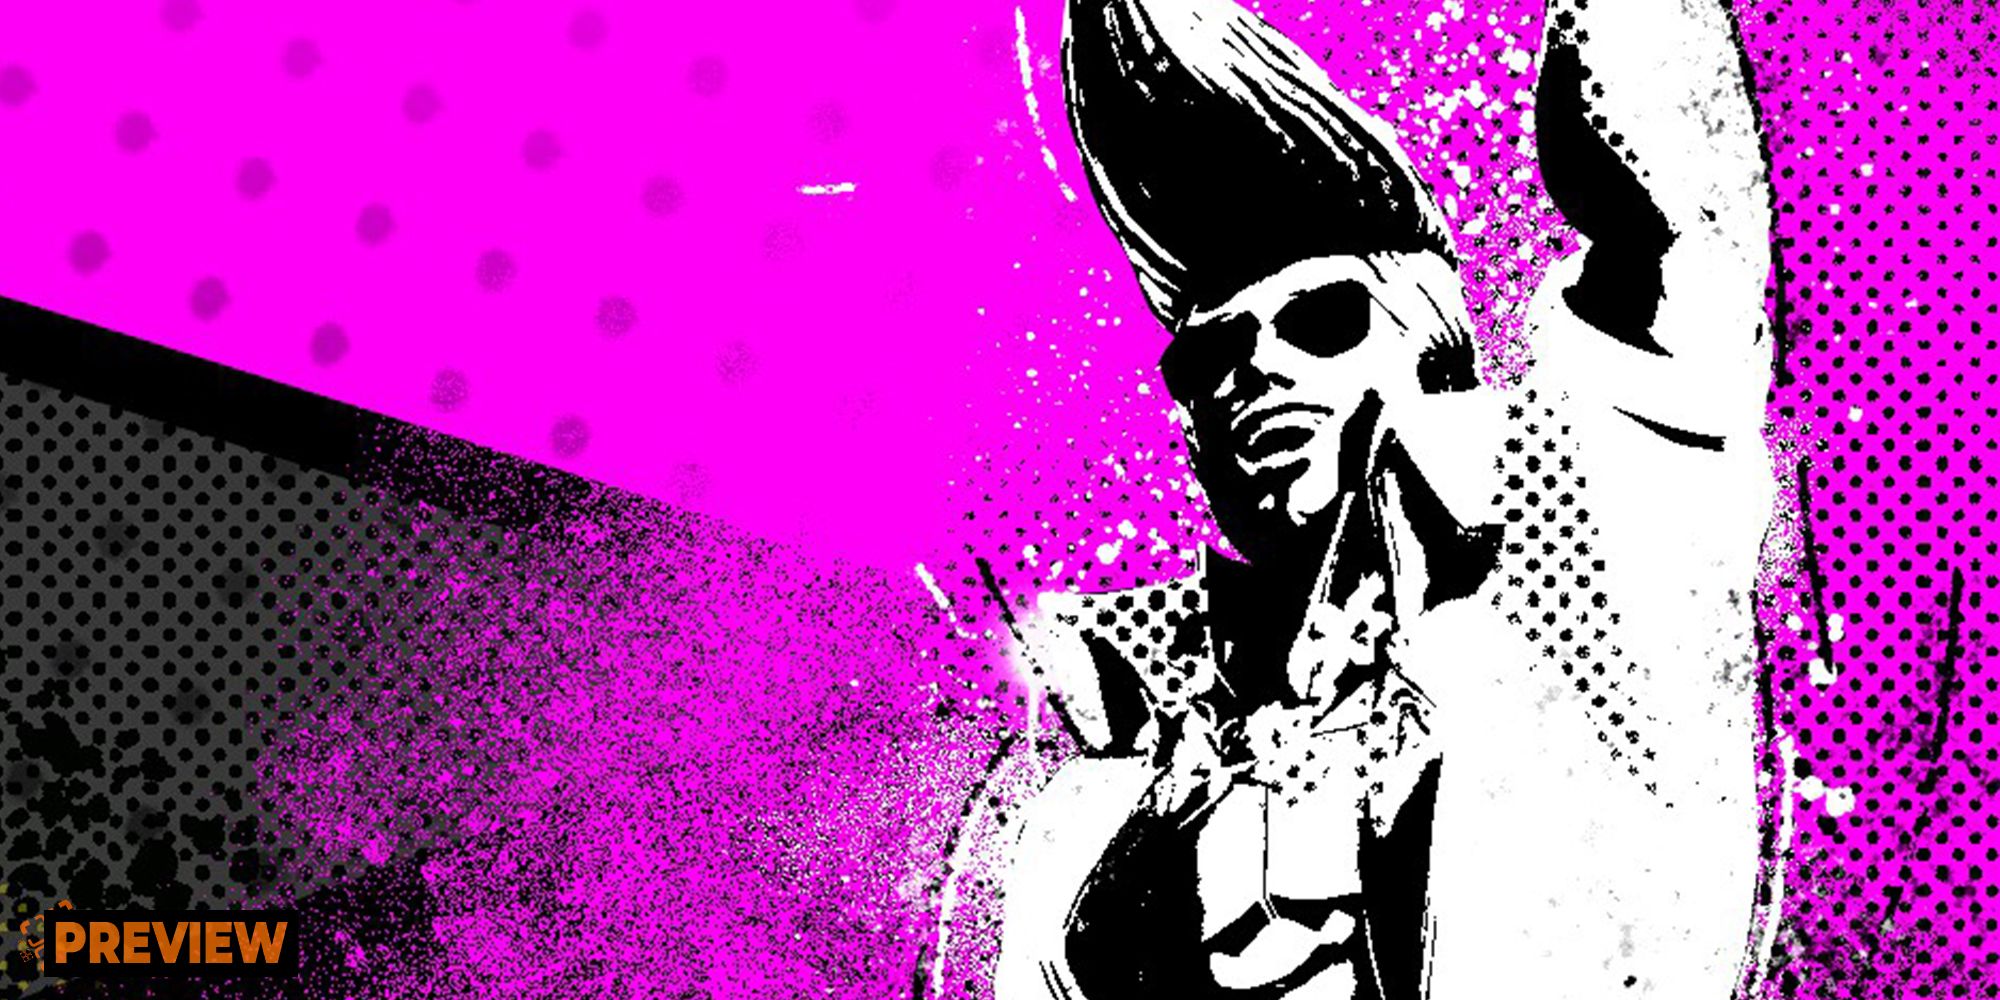 God of Rock Elvis-like character in black and white over comic-y purple background